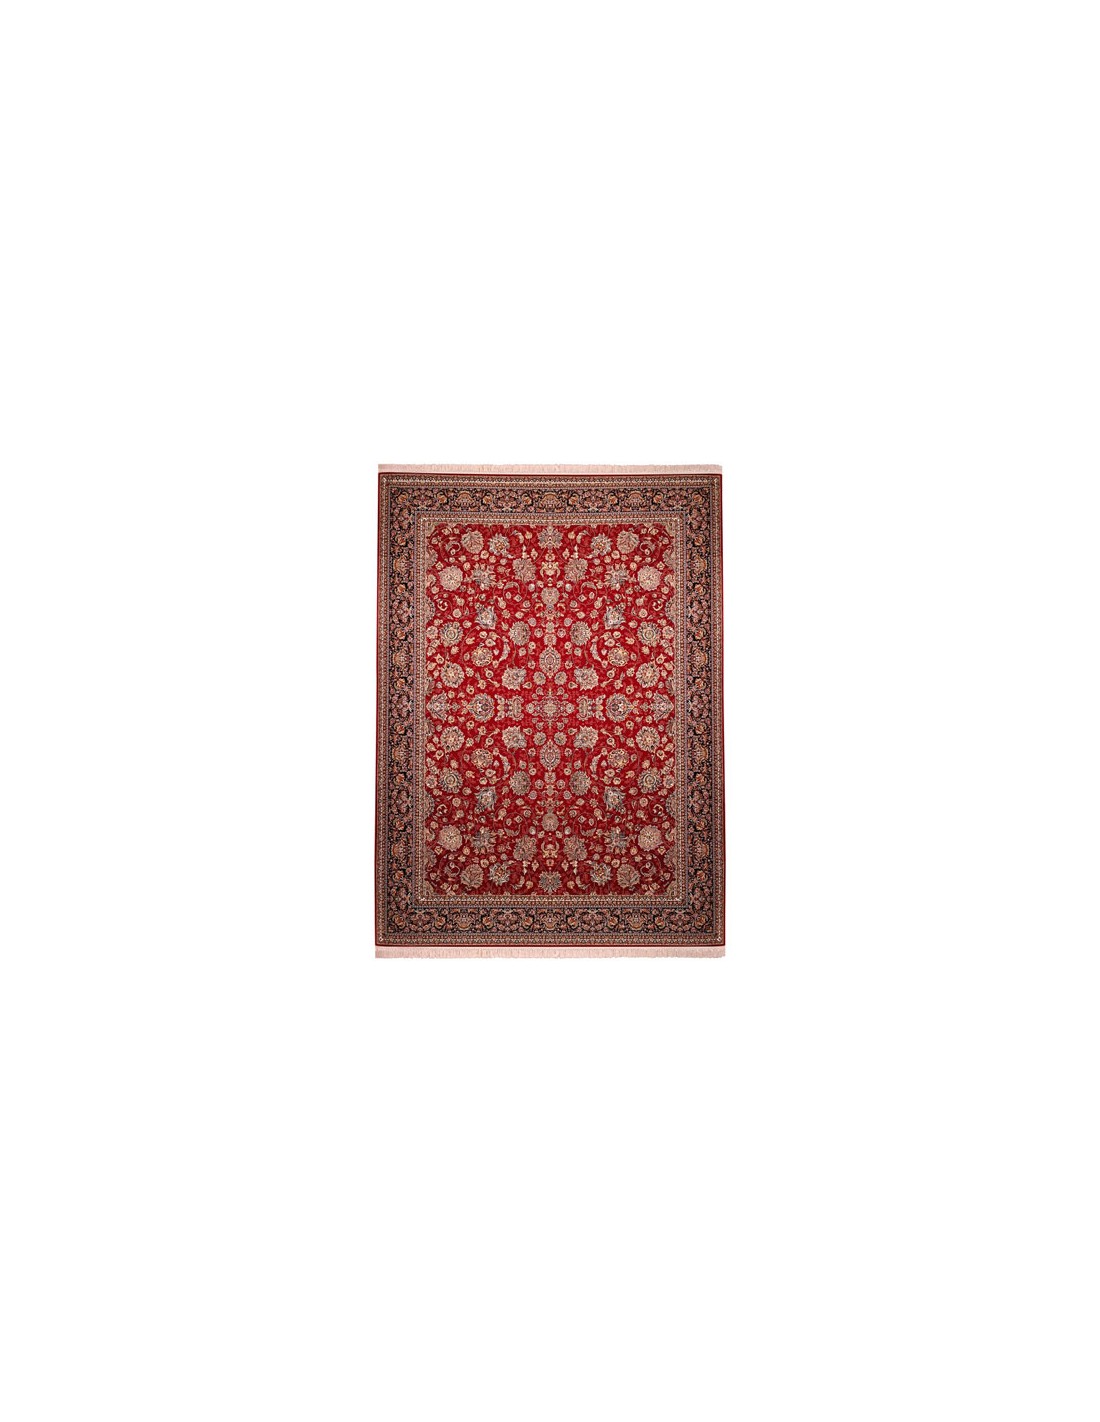 Red Rug|Amazing red carpets at best price and quality